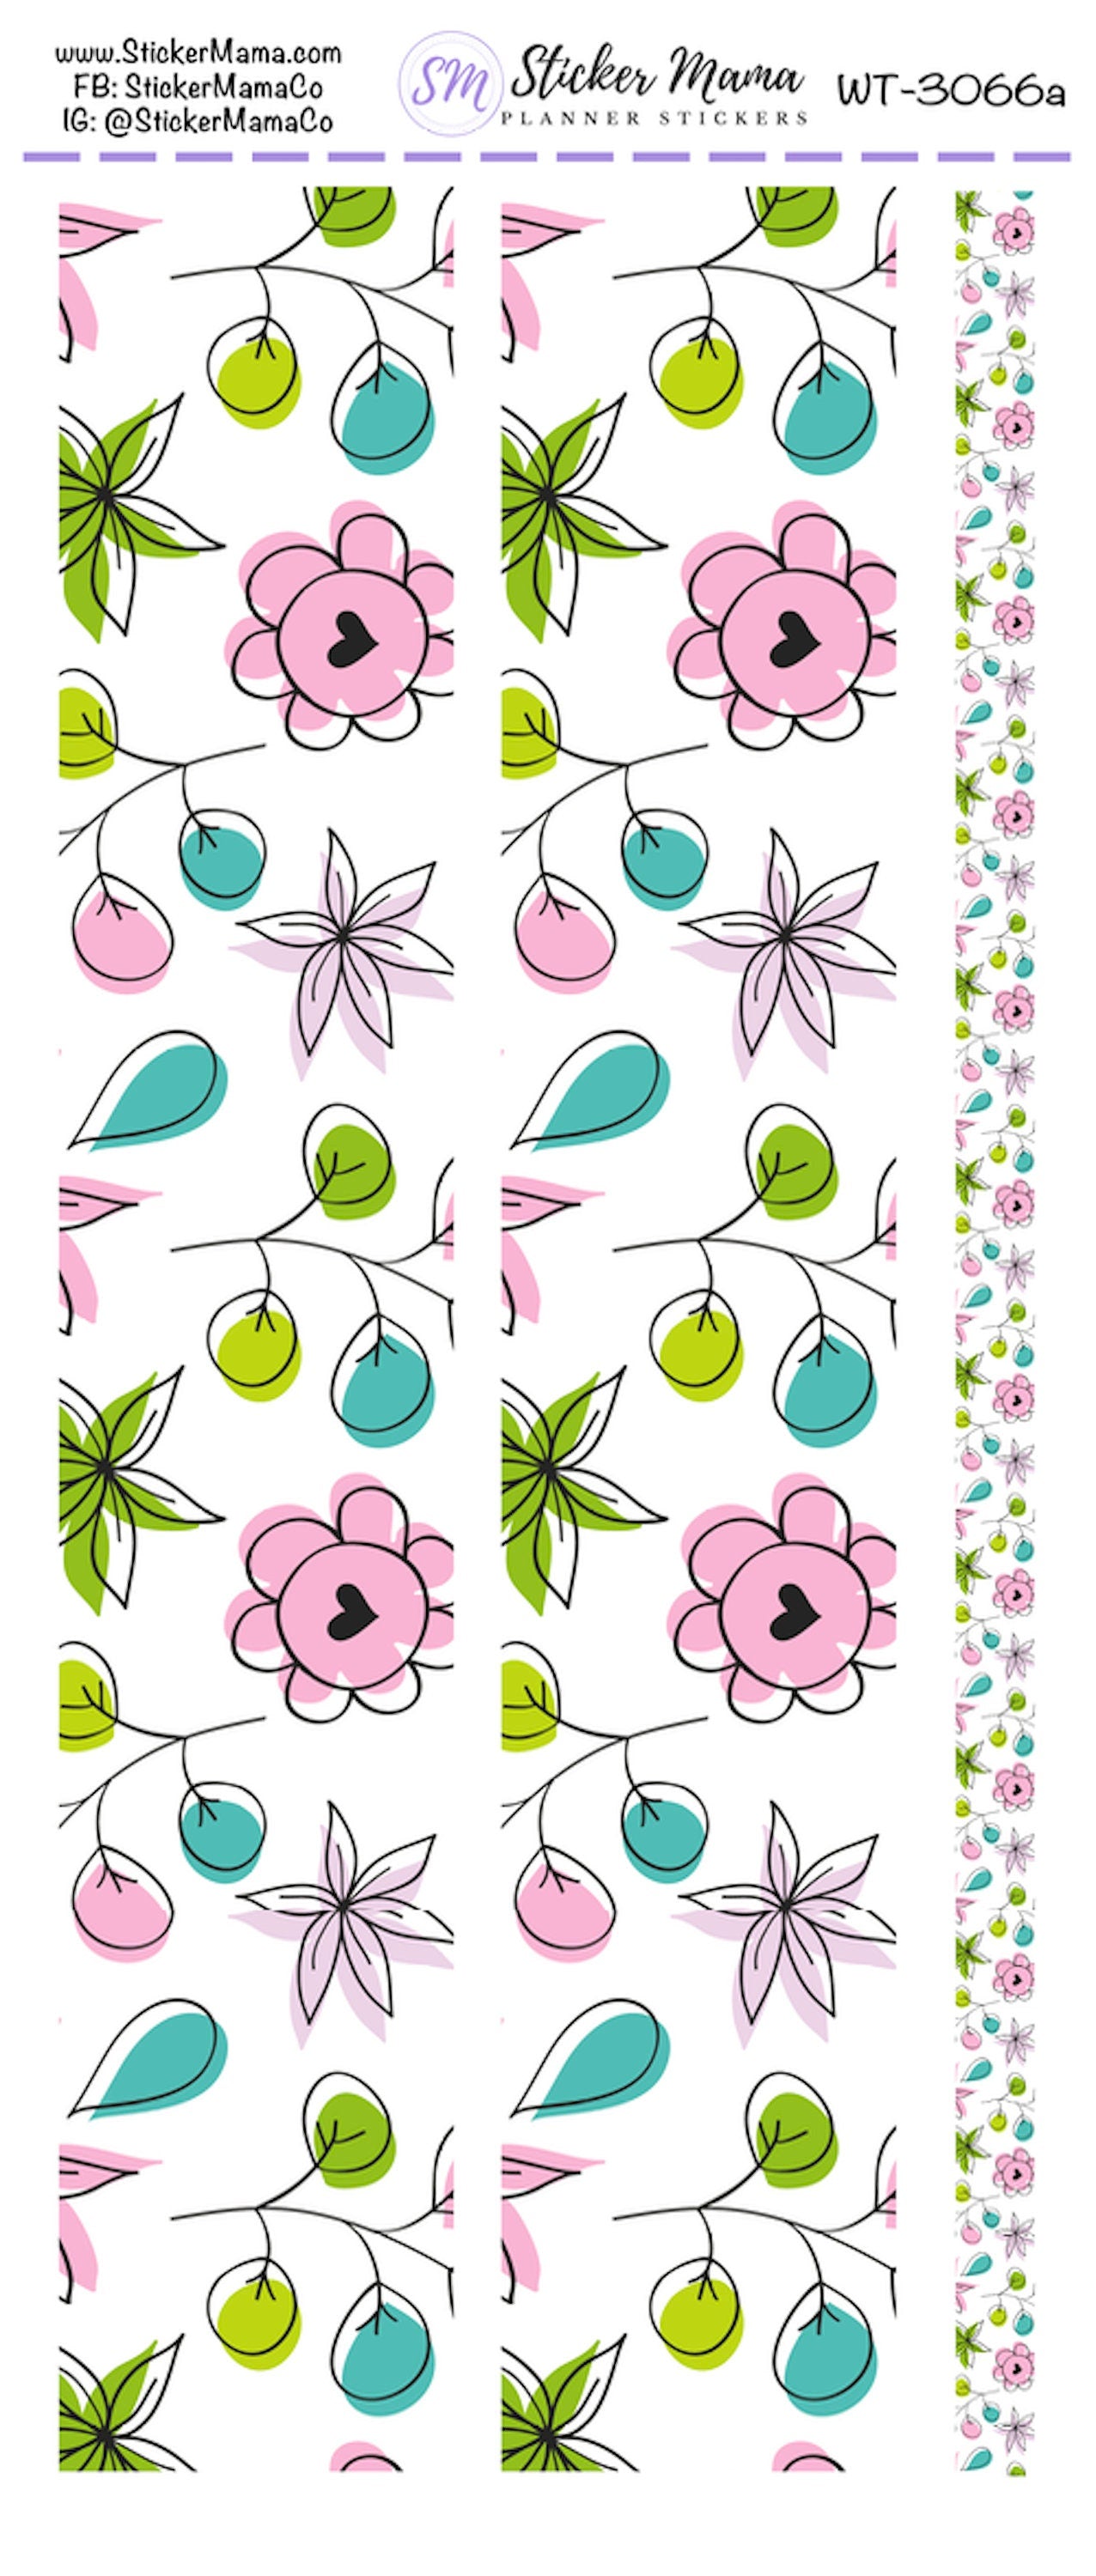 W-3066 - WASHI STICKERS - Spring Floral - Planner Stickers - Washi for Planners